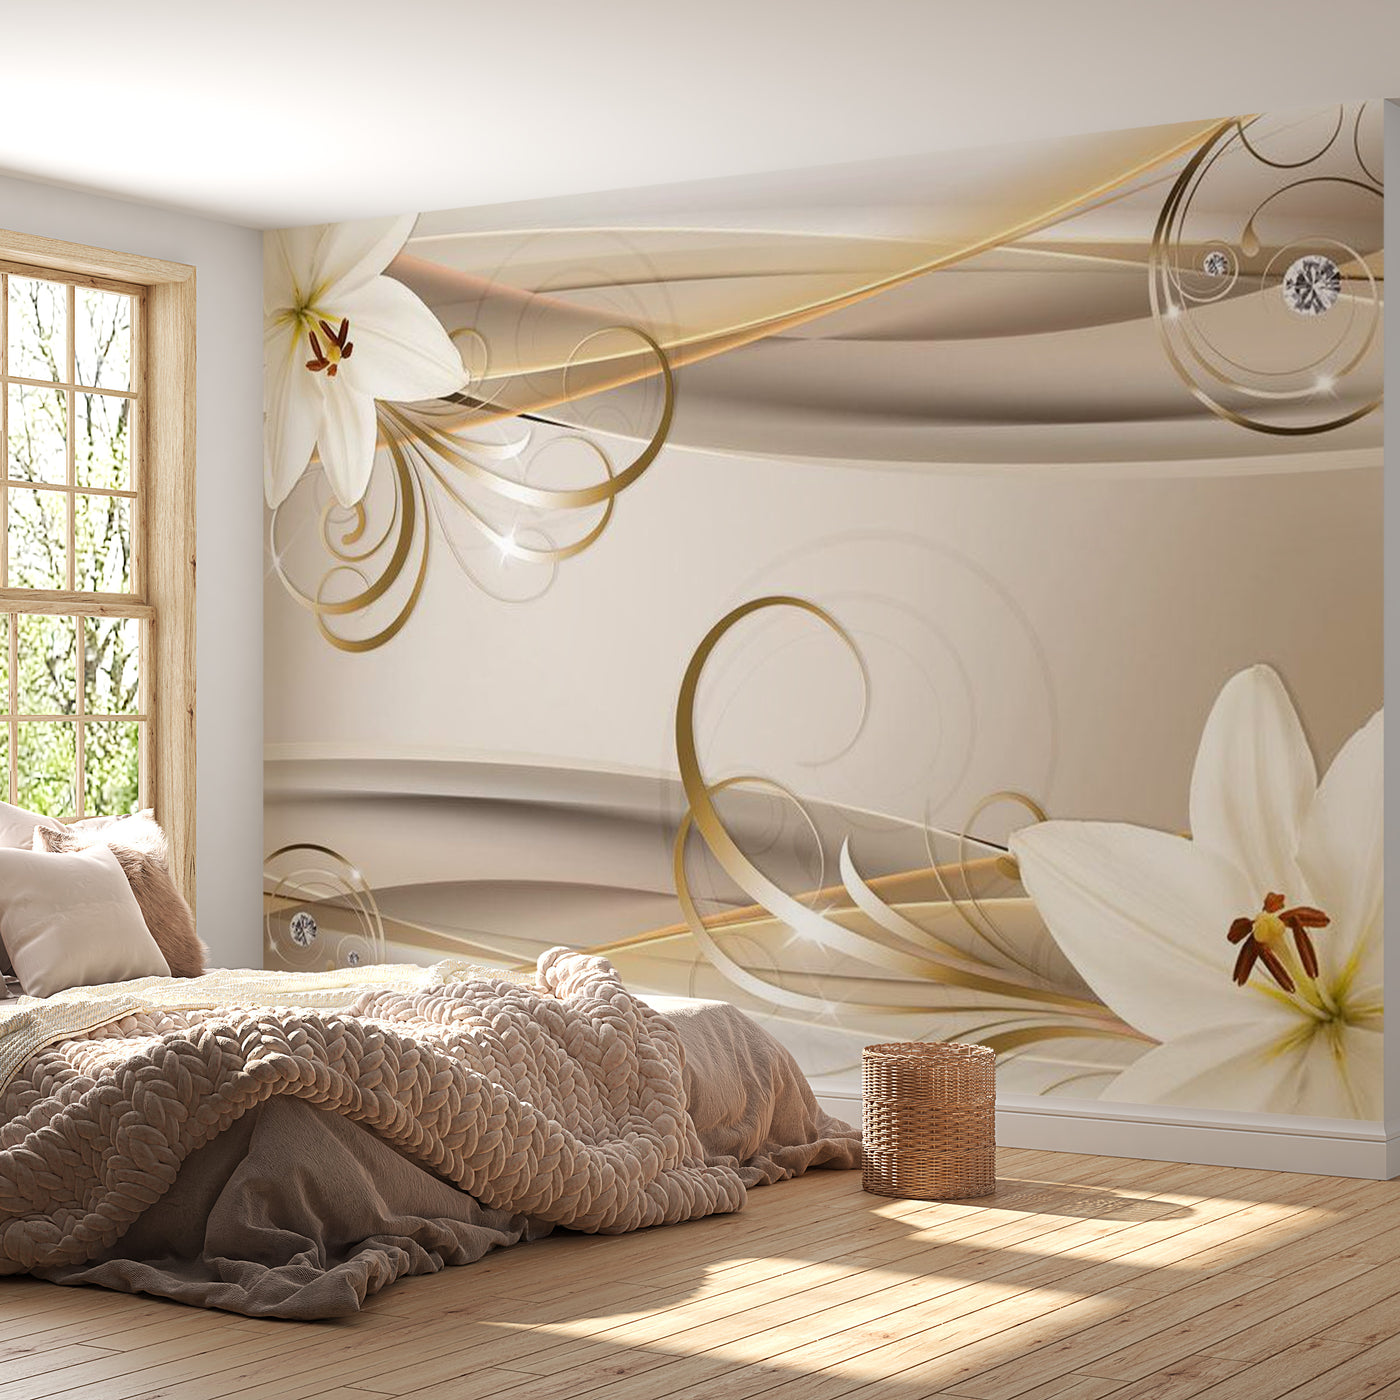 Peel & Stick Floral Wall Mural - Lilies And The Gold Spirals - Removable Wall Decals